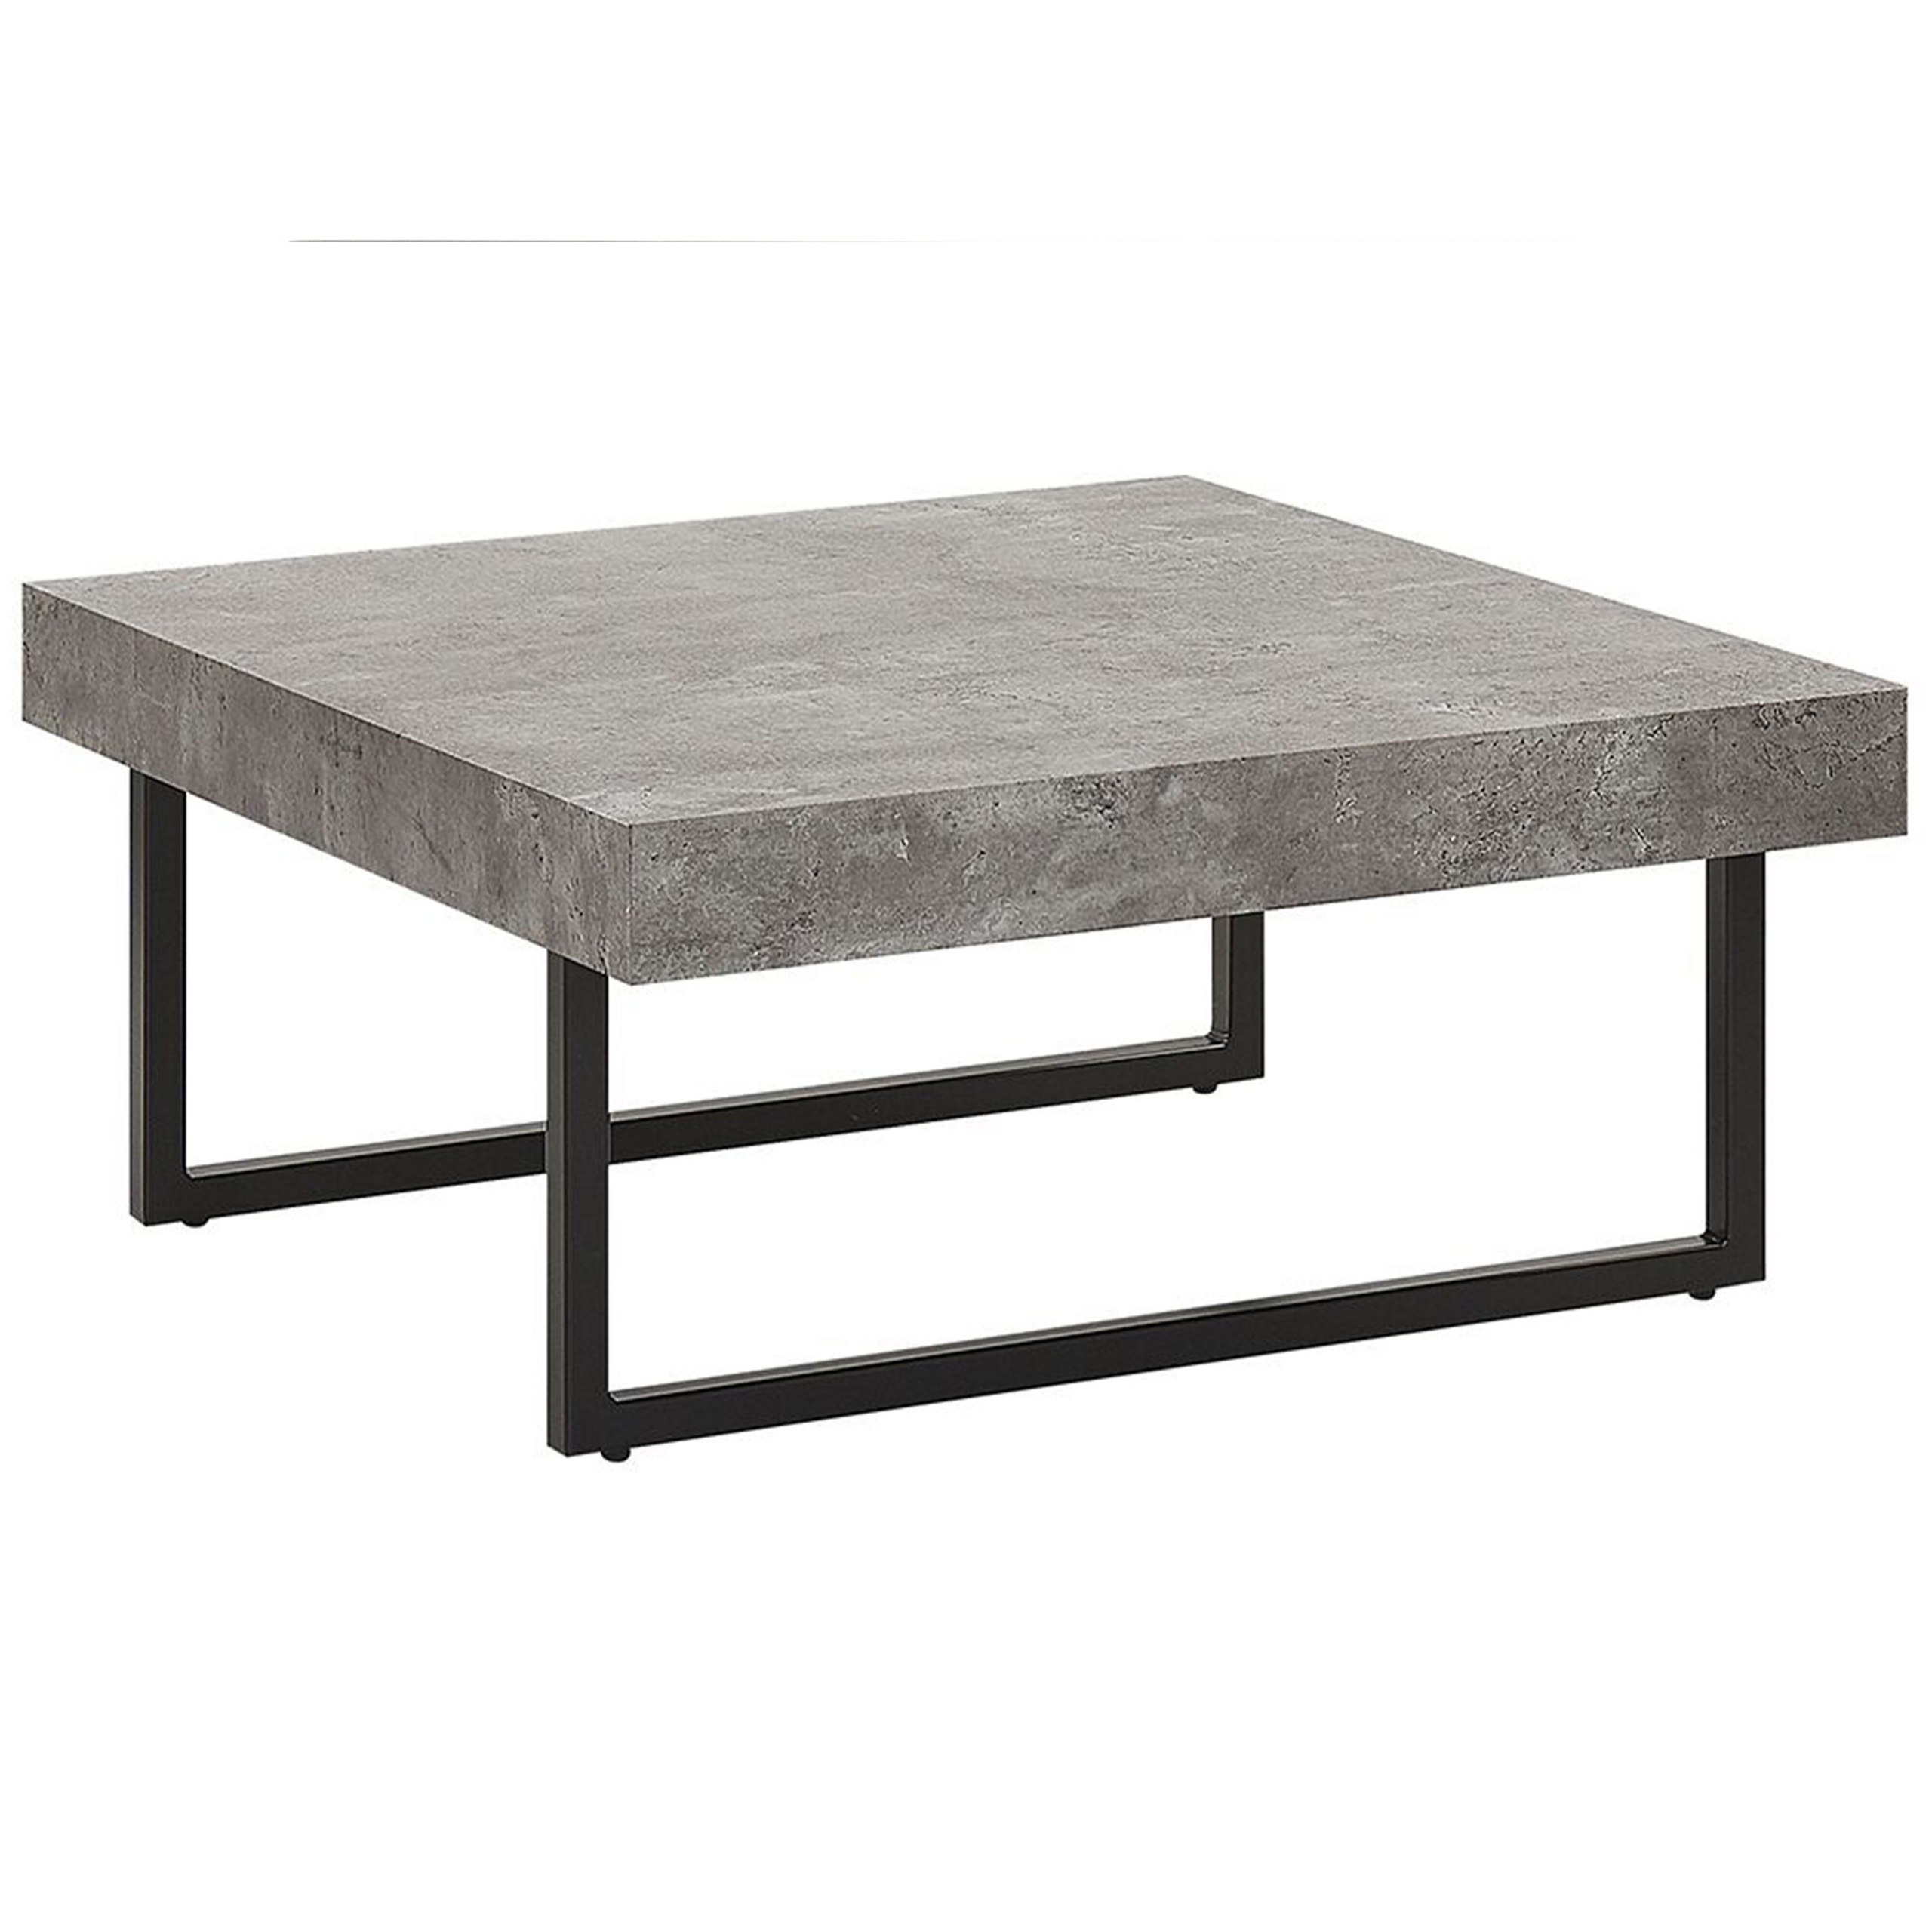 Beliani Square Coffee Table Industrial Style MDF Top with Concrete Finish Metal Legs with Caps